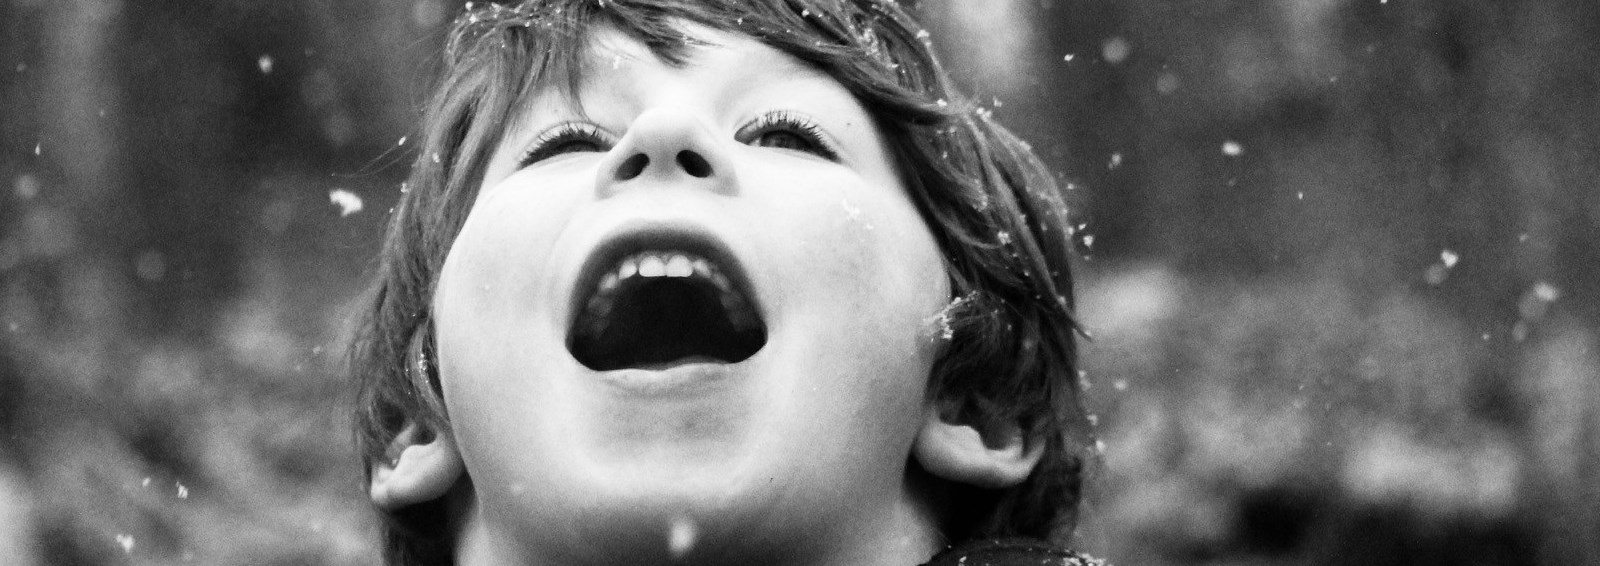 Child smiling as snow falls